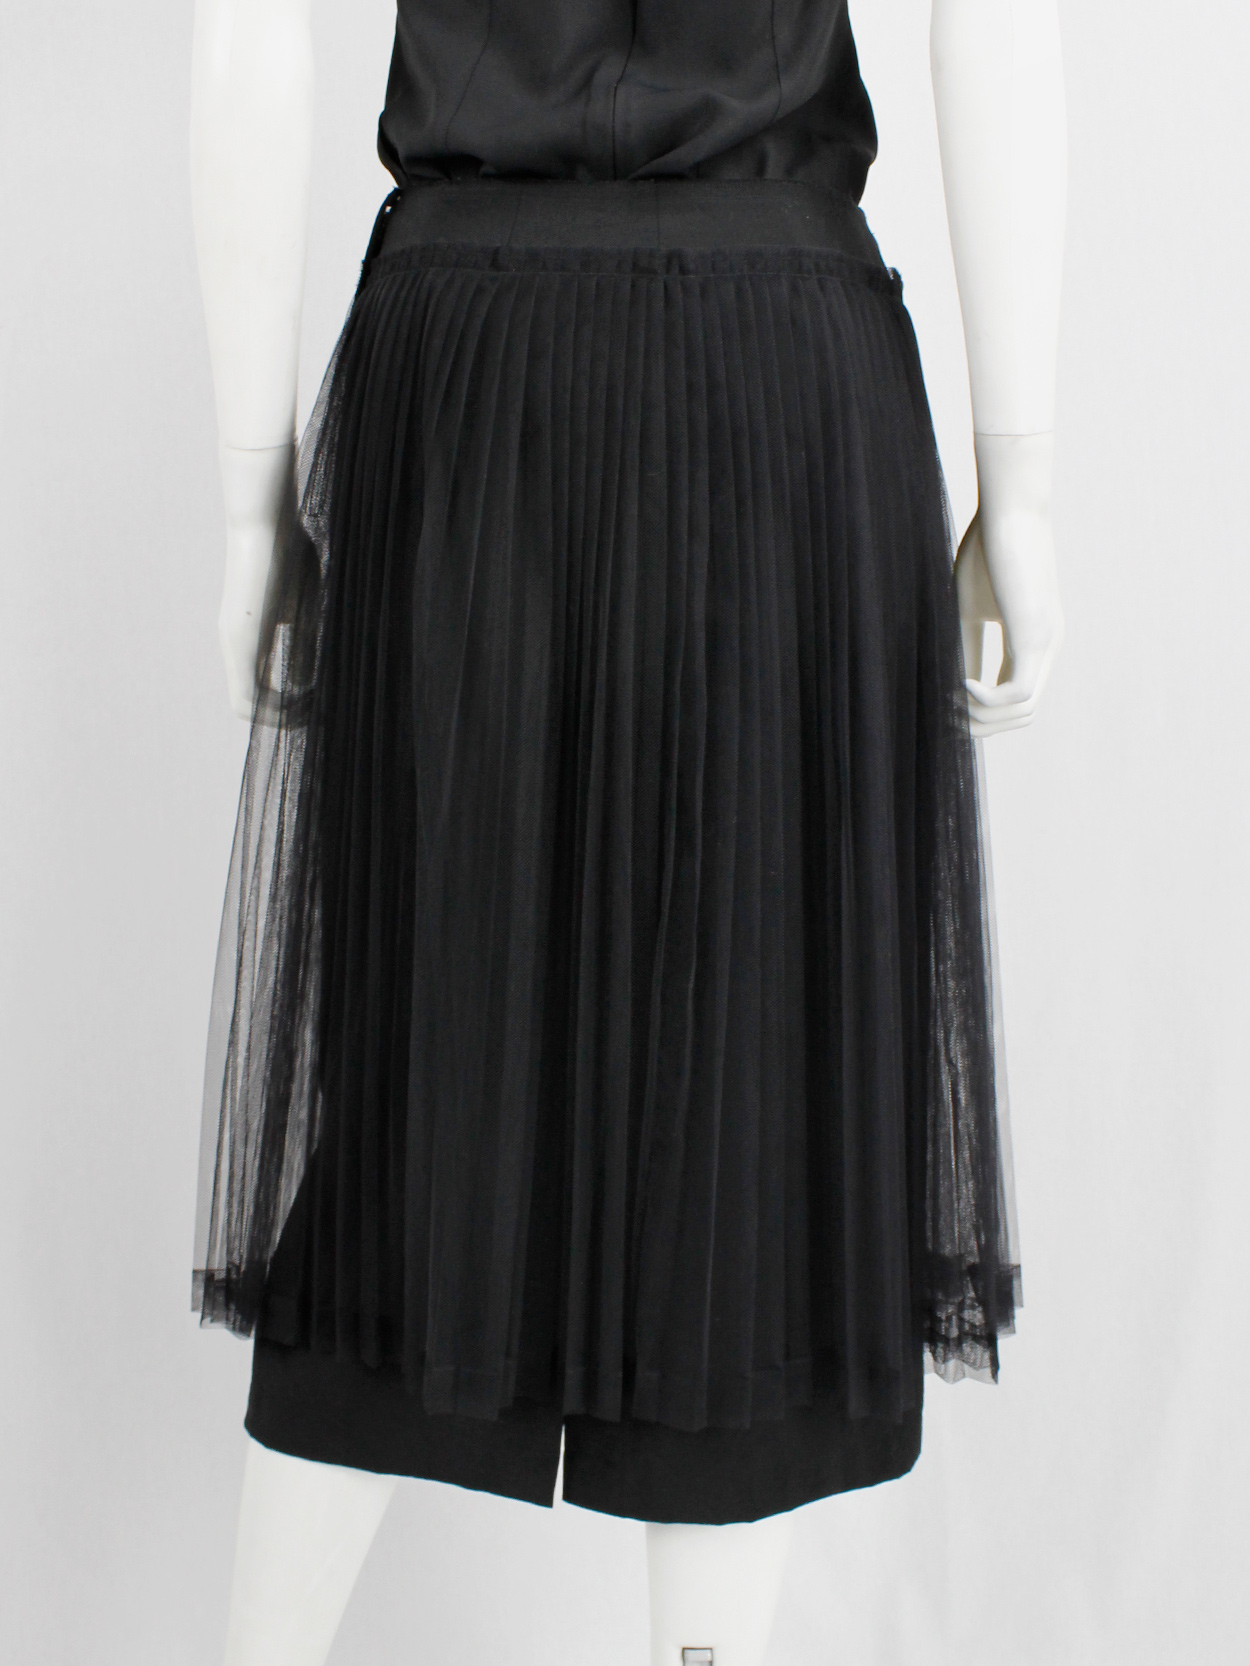 Comme des Garçons black pencil skirt with attached pleated mesh skirt ...